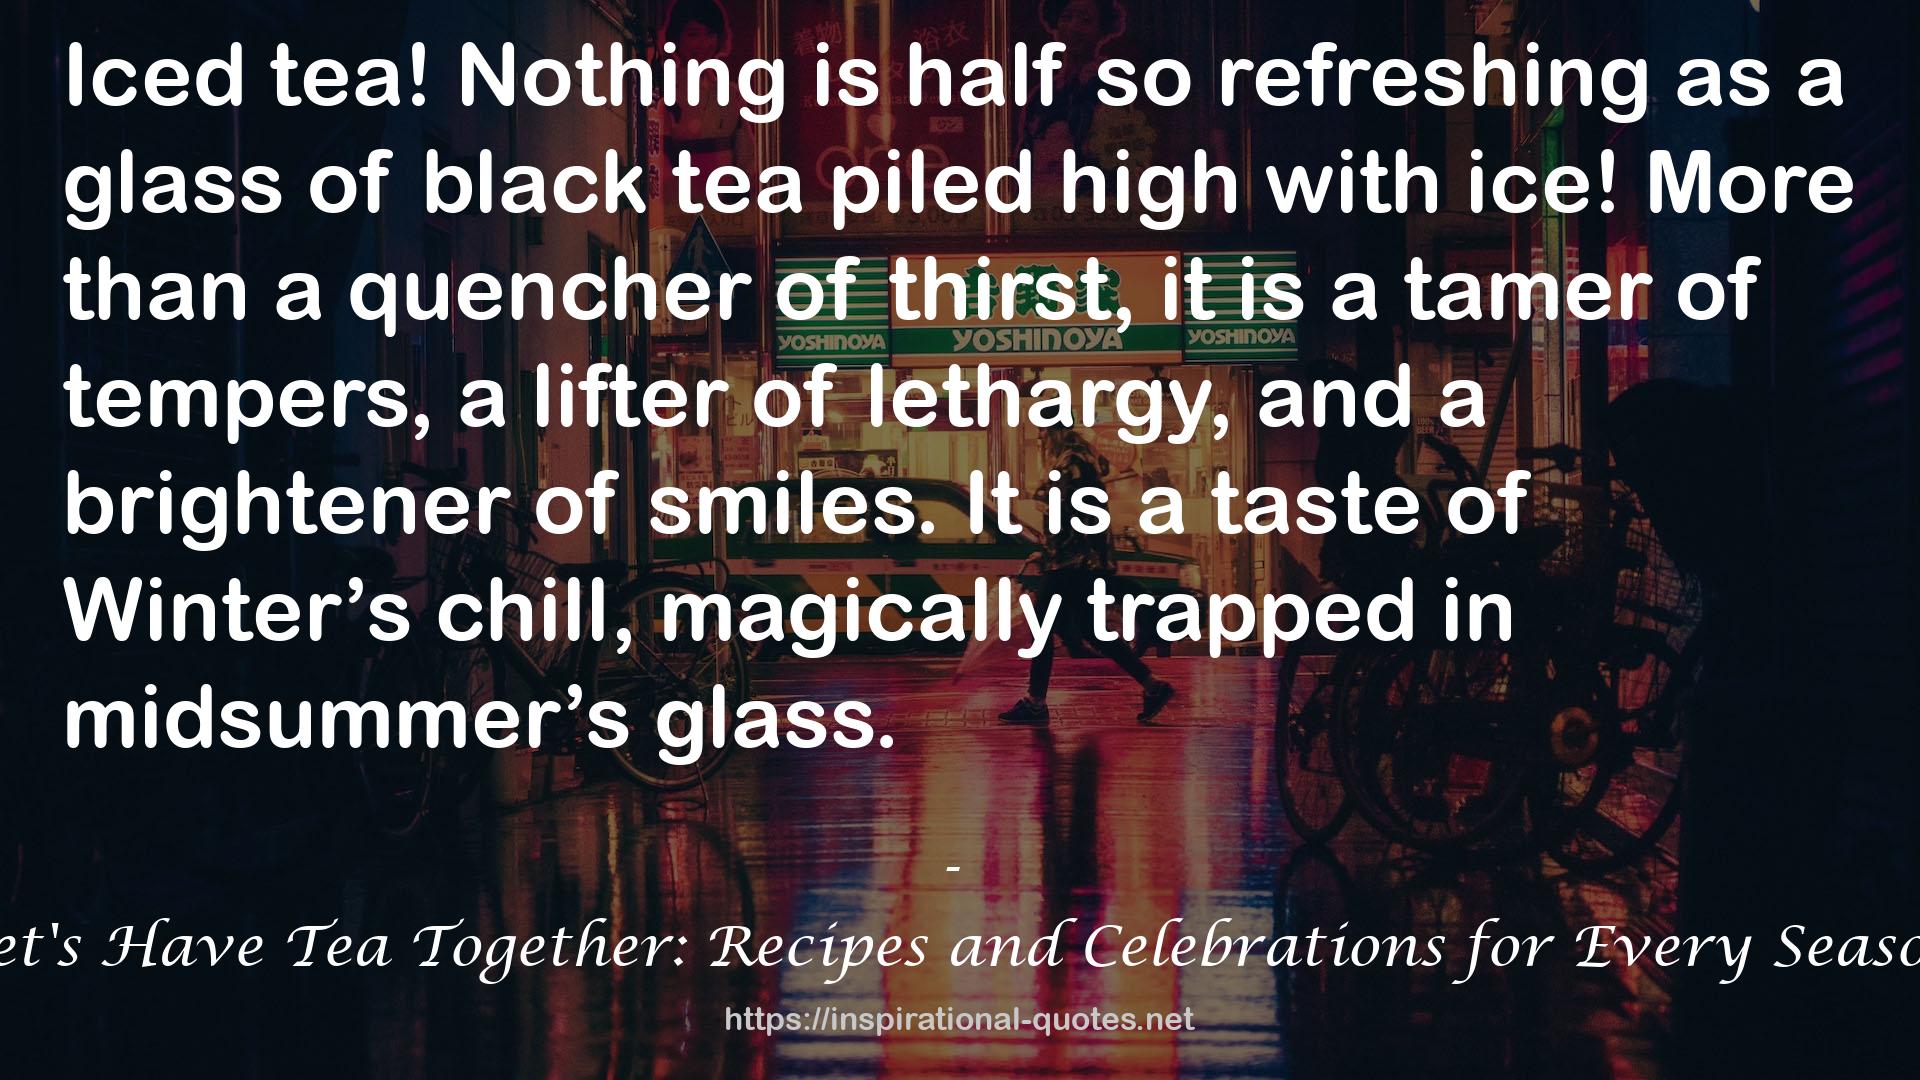 Let's Have Tea Together: Recipes and Celebrations for Every Season QUOTES